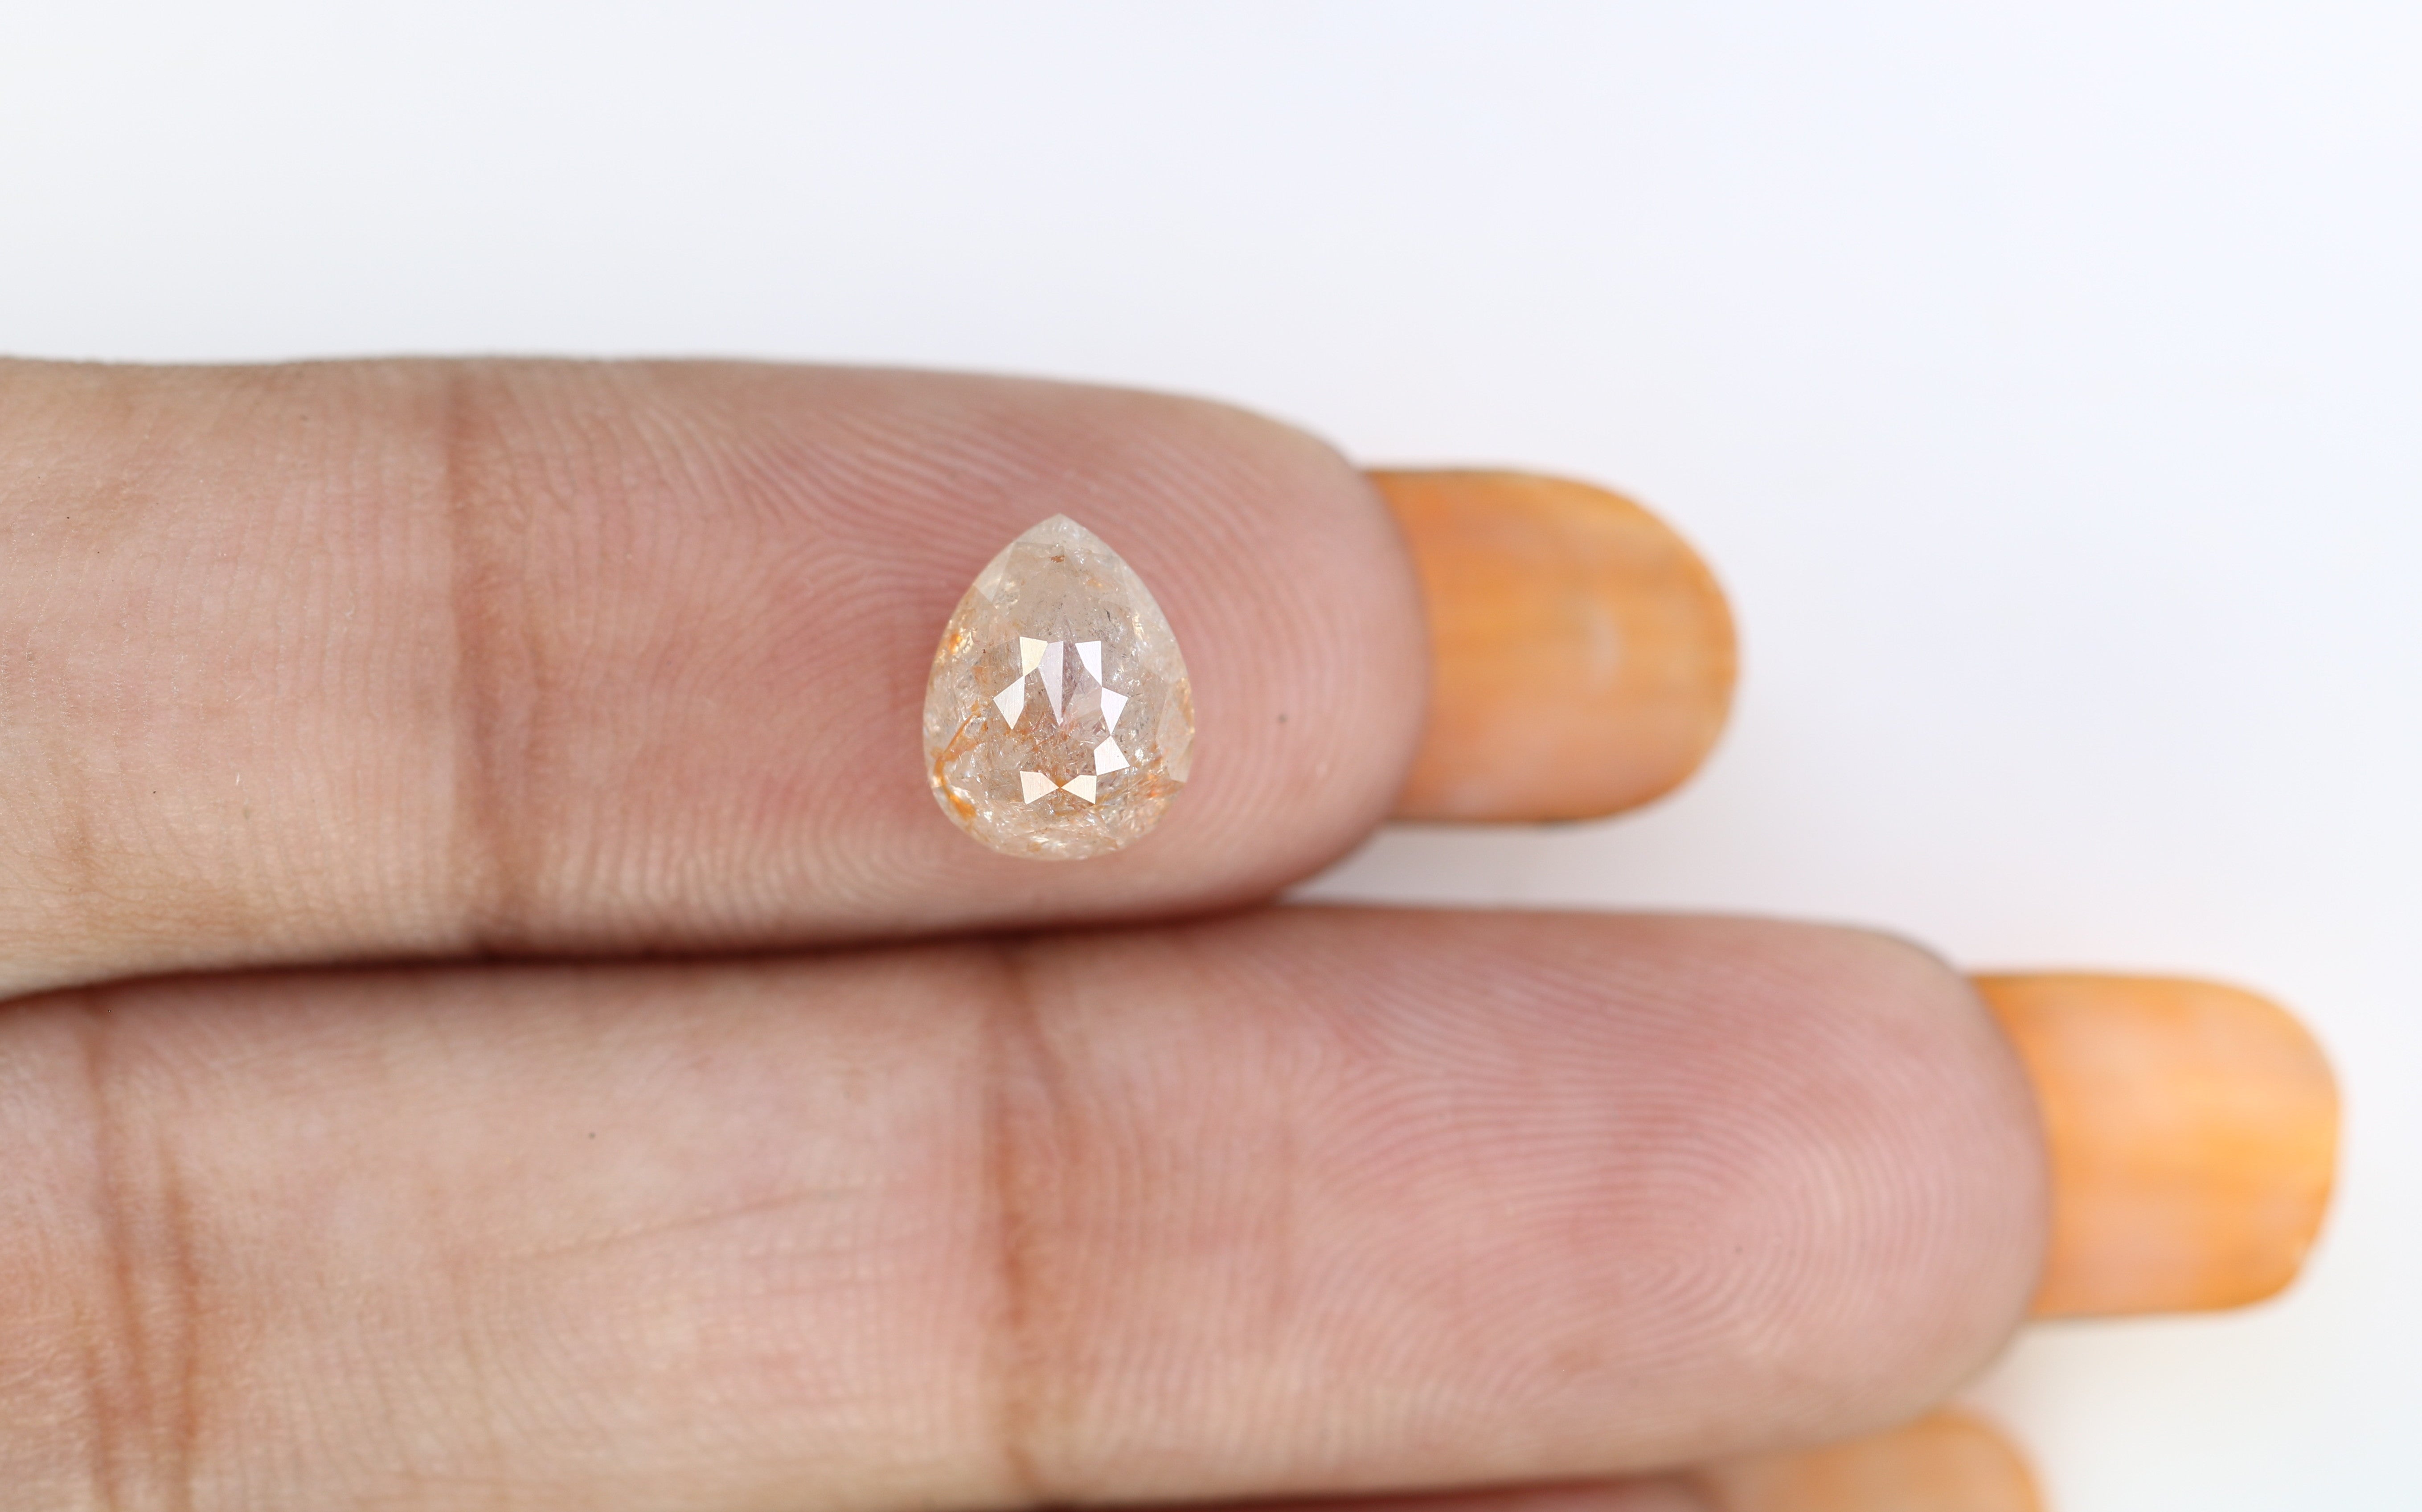 1.76 CT Natural Peach Loose Pear Cut Diamond For Engagement Ring